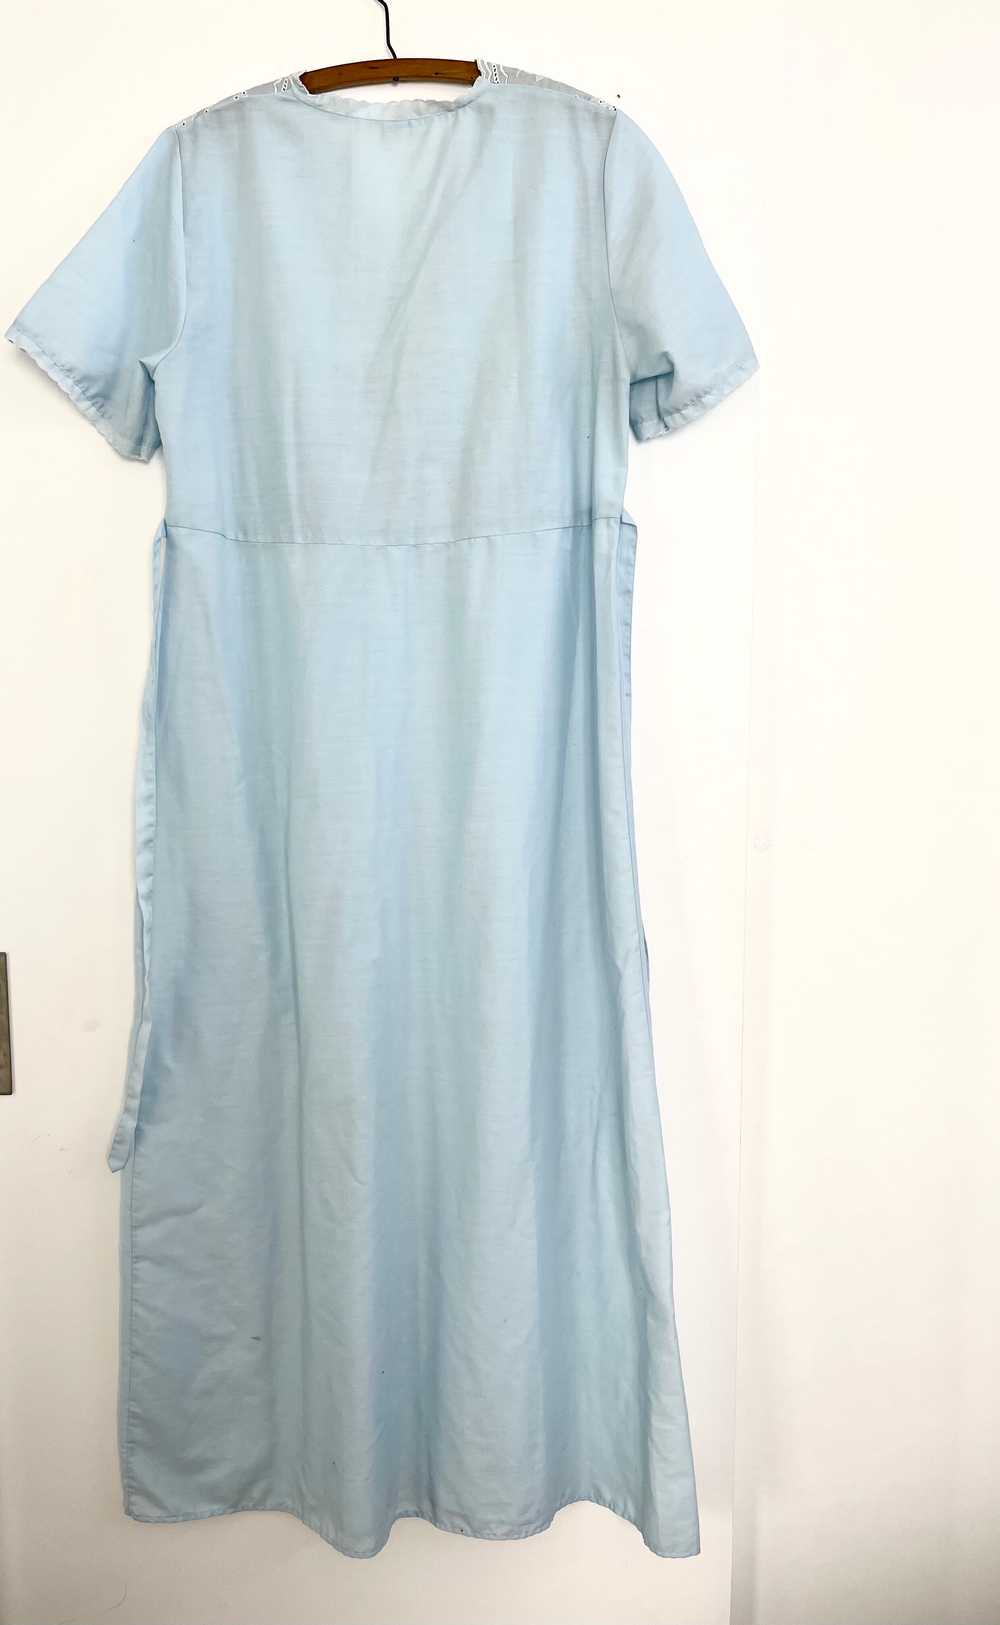 Pale Blue 40's Inspired Dress - image 6